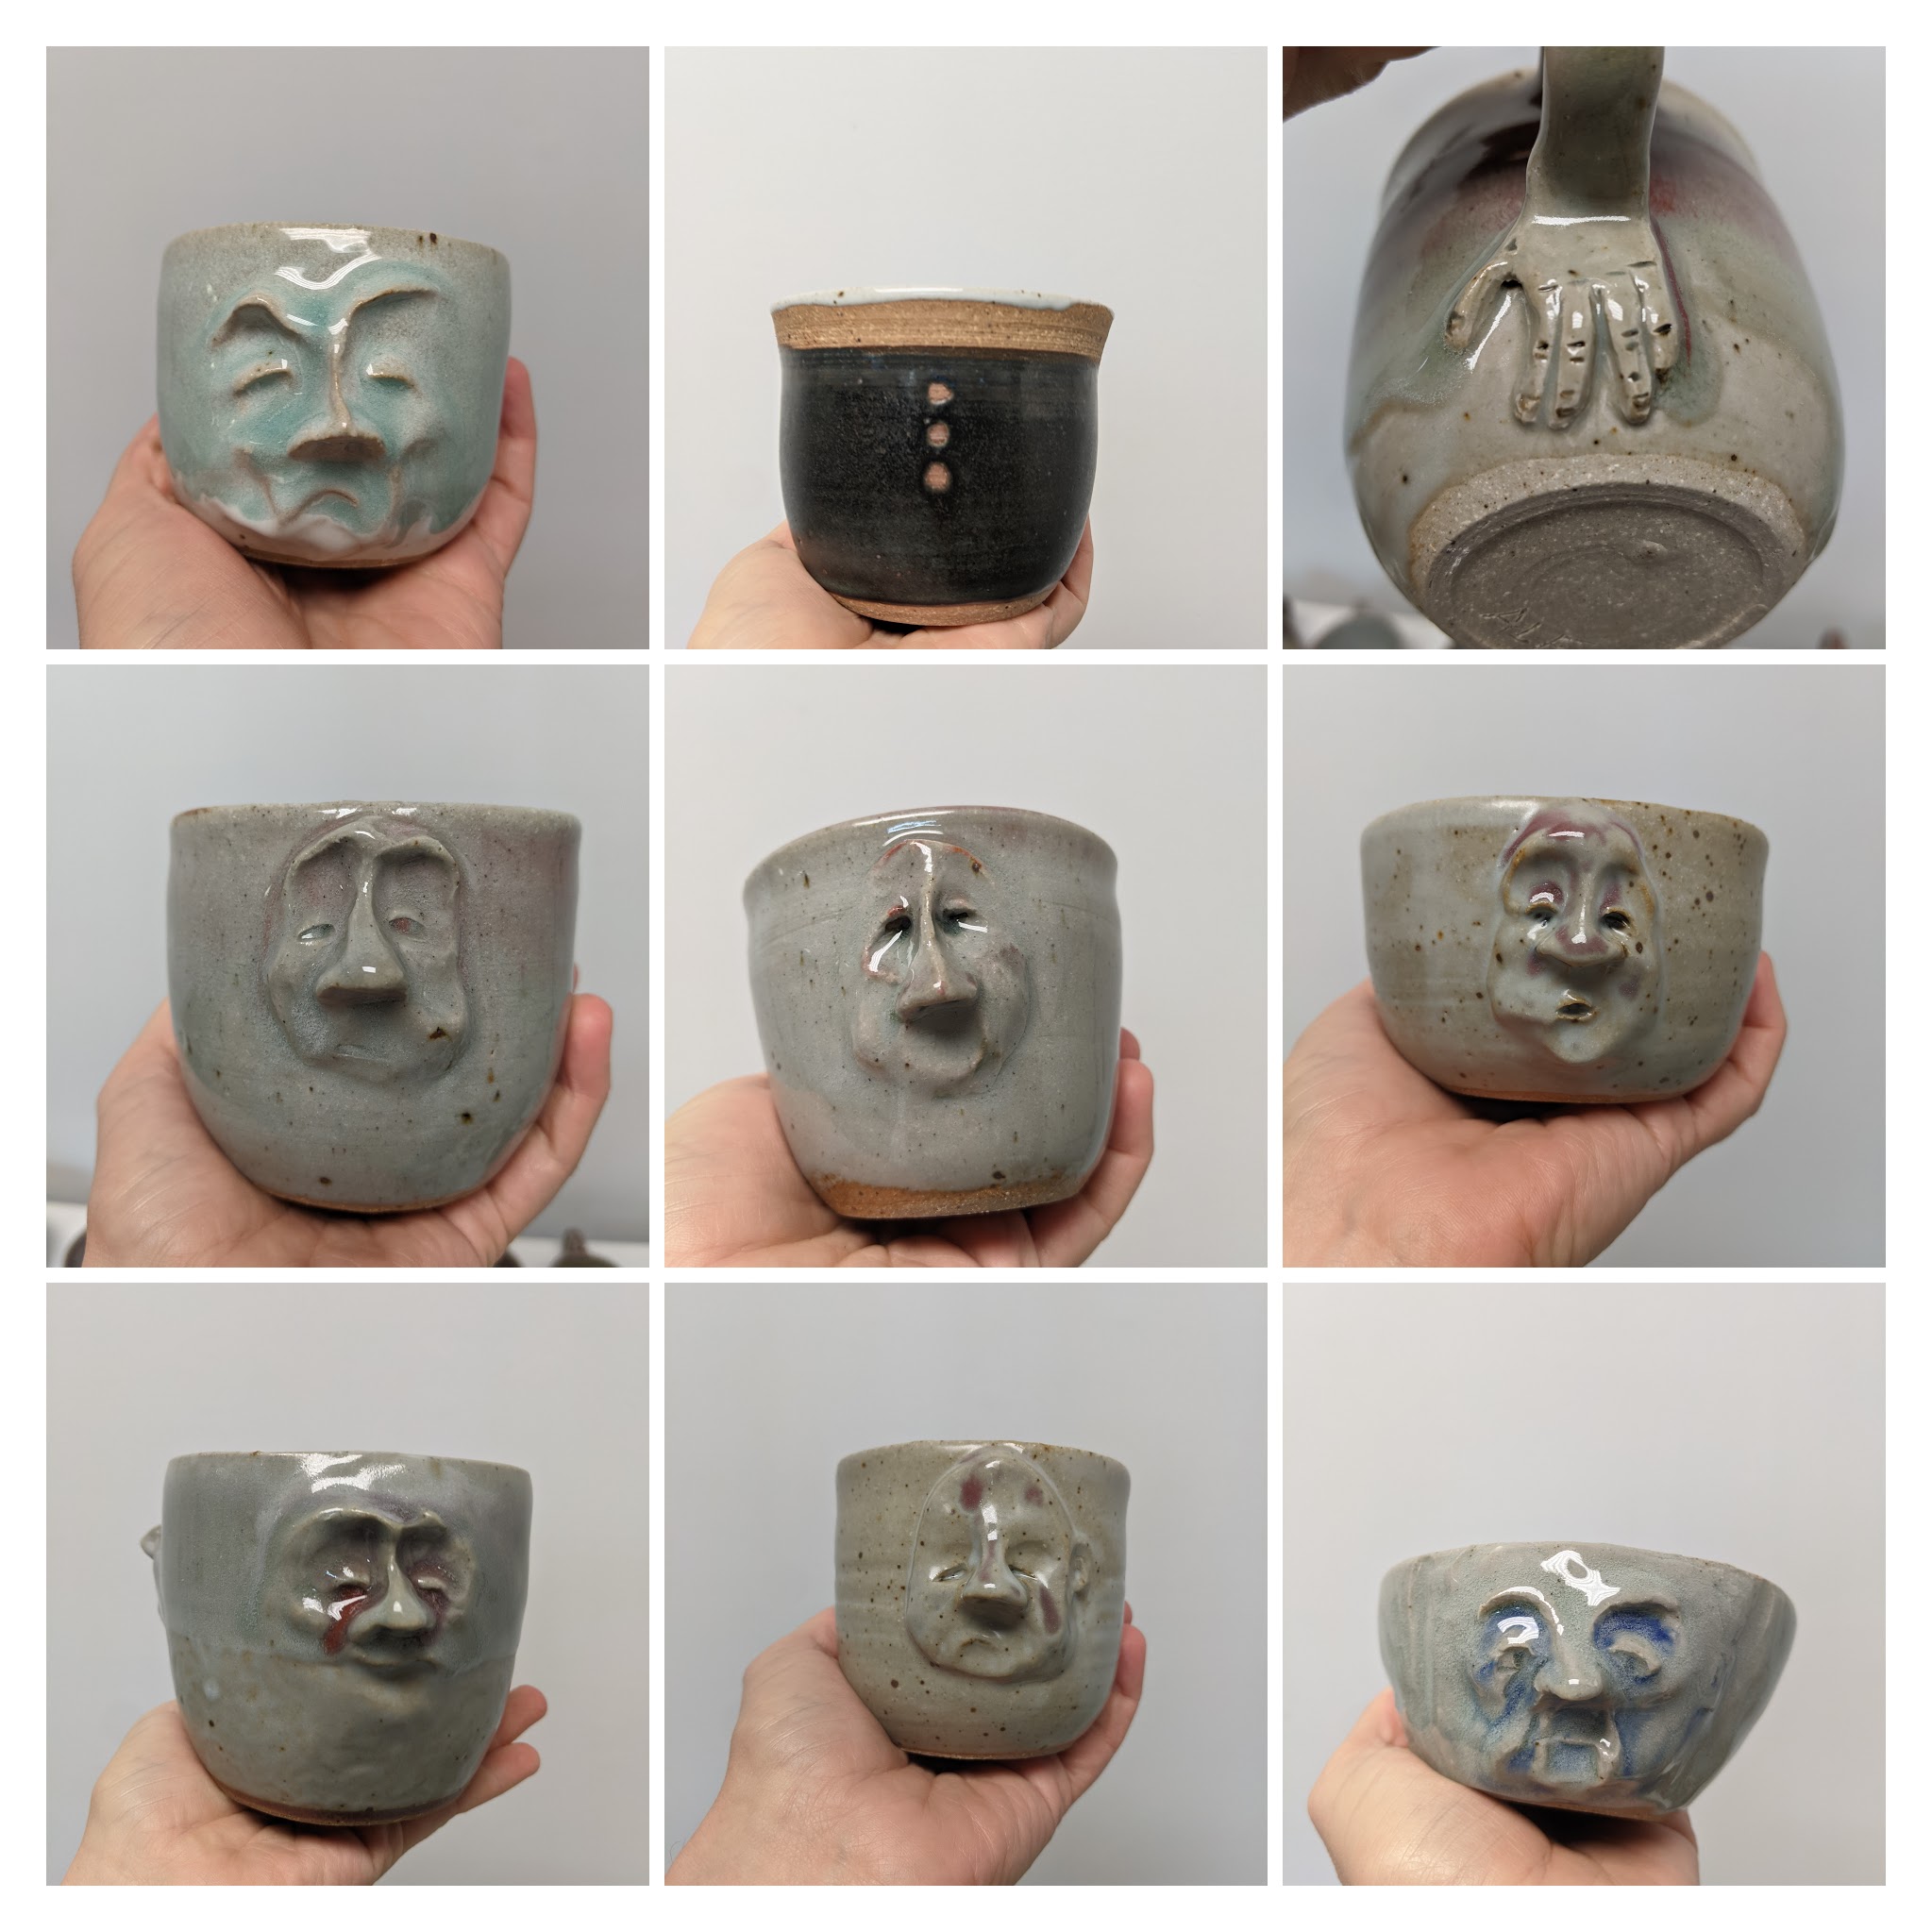 An image with nine handthrown ceramic mugs and vessels, 8 of which have faces and/or hands. 